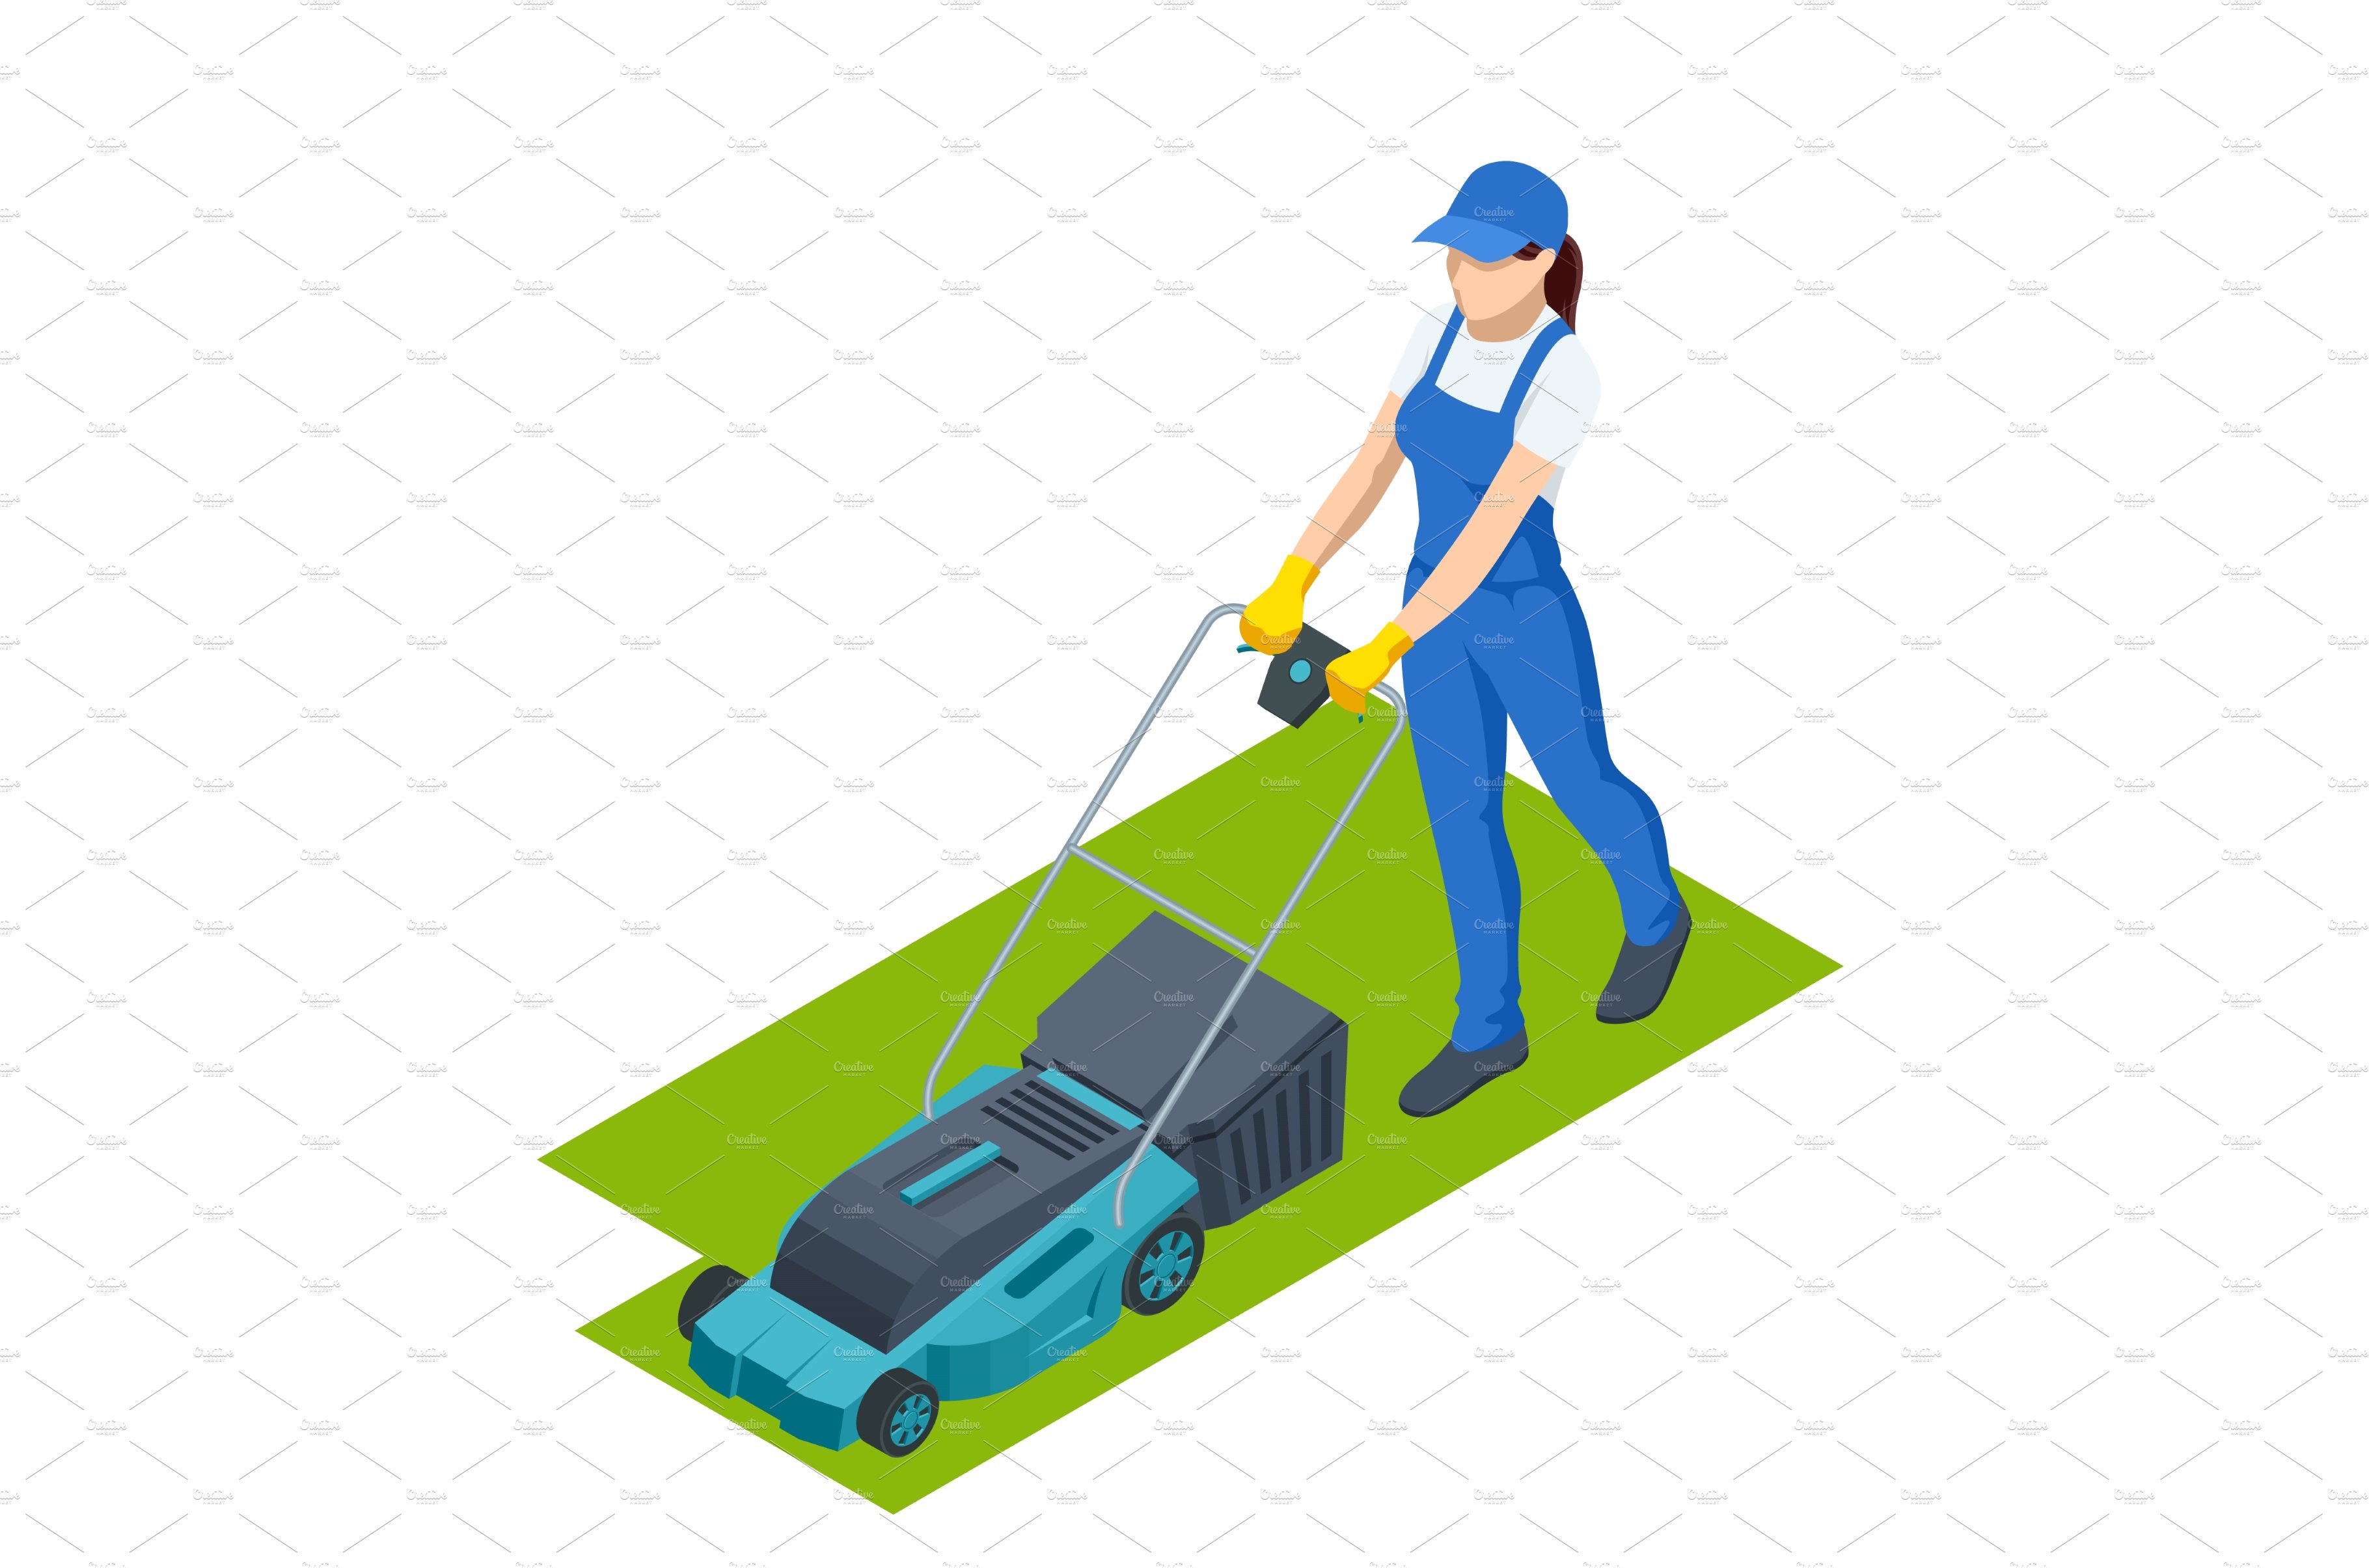 Agricultural work. Woman lawn mower cover image.